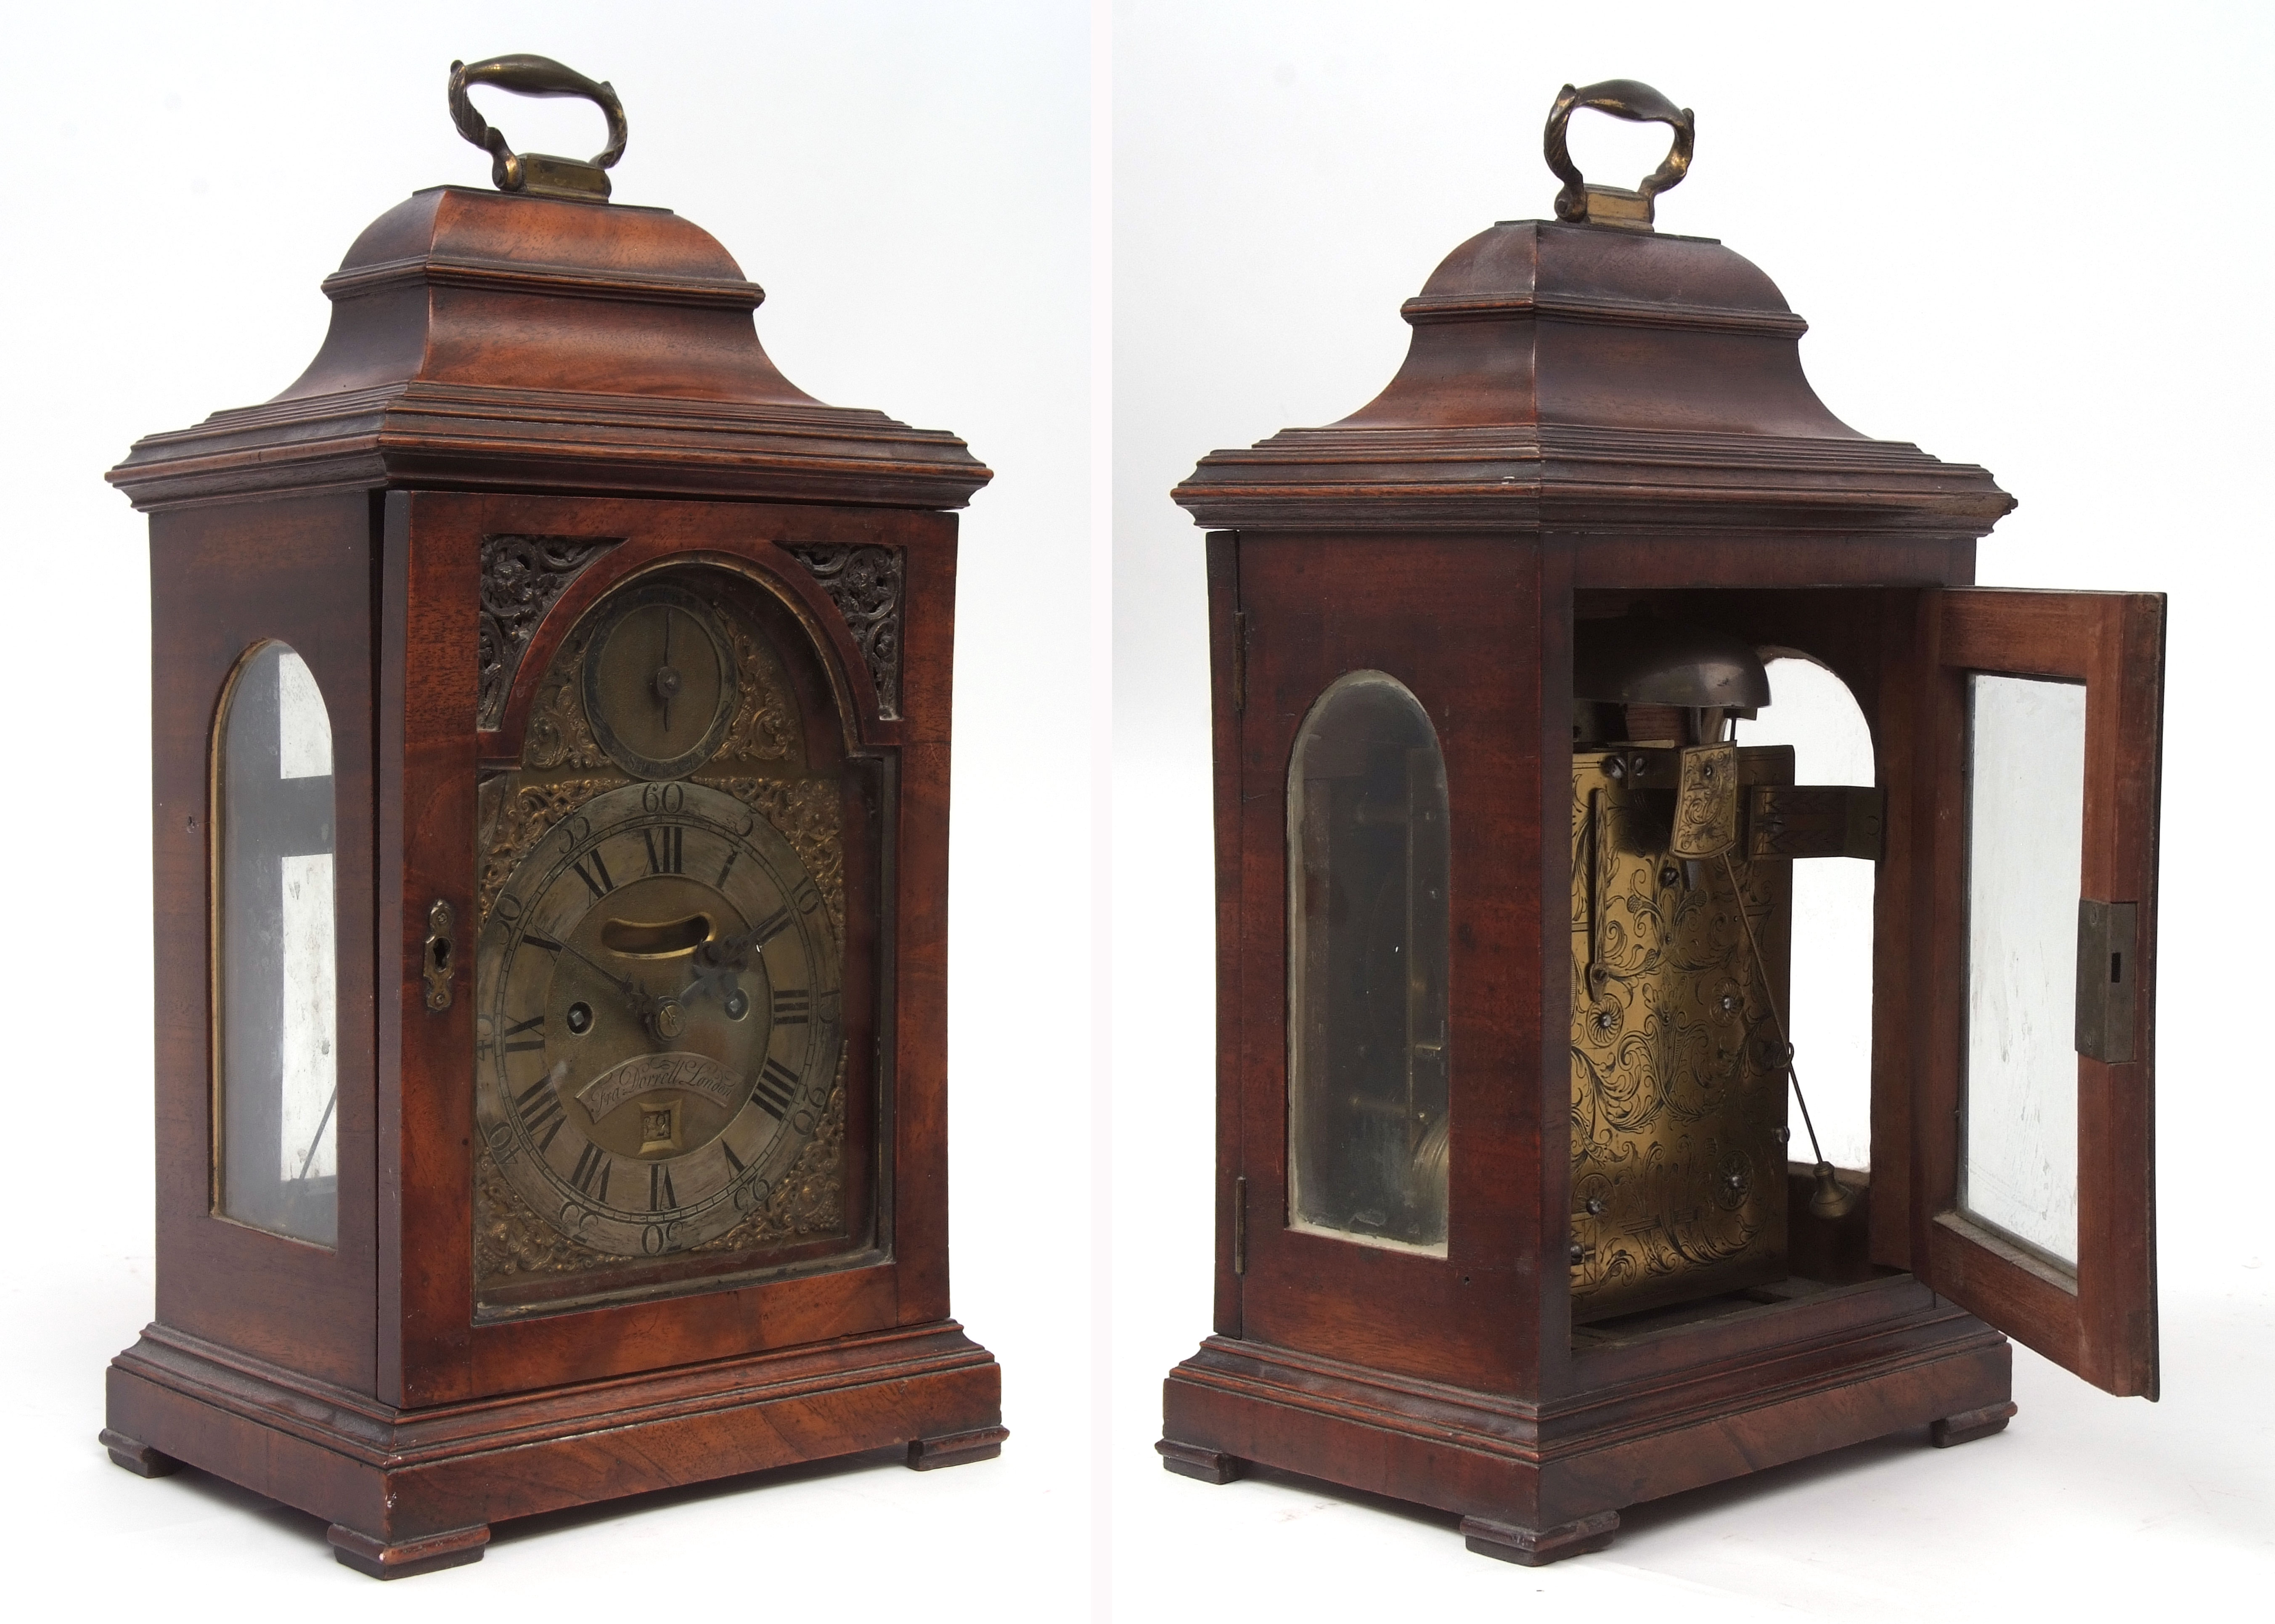 Second half of 18th century mahogany cased verge table clock, Francis (Fra) Dorrell - London, the